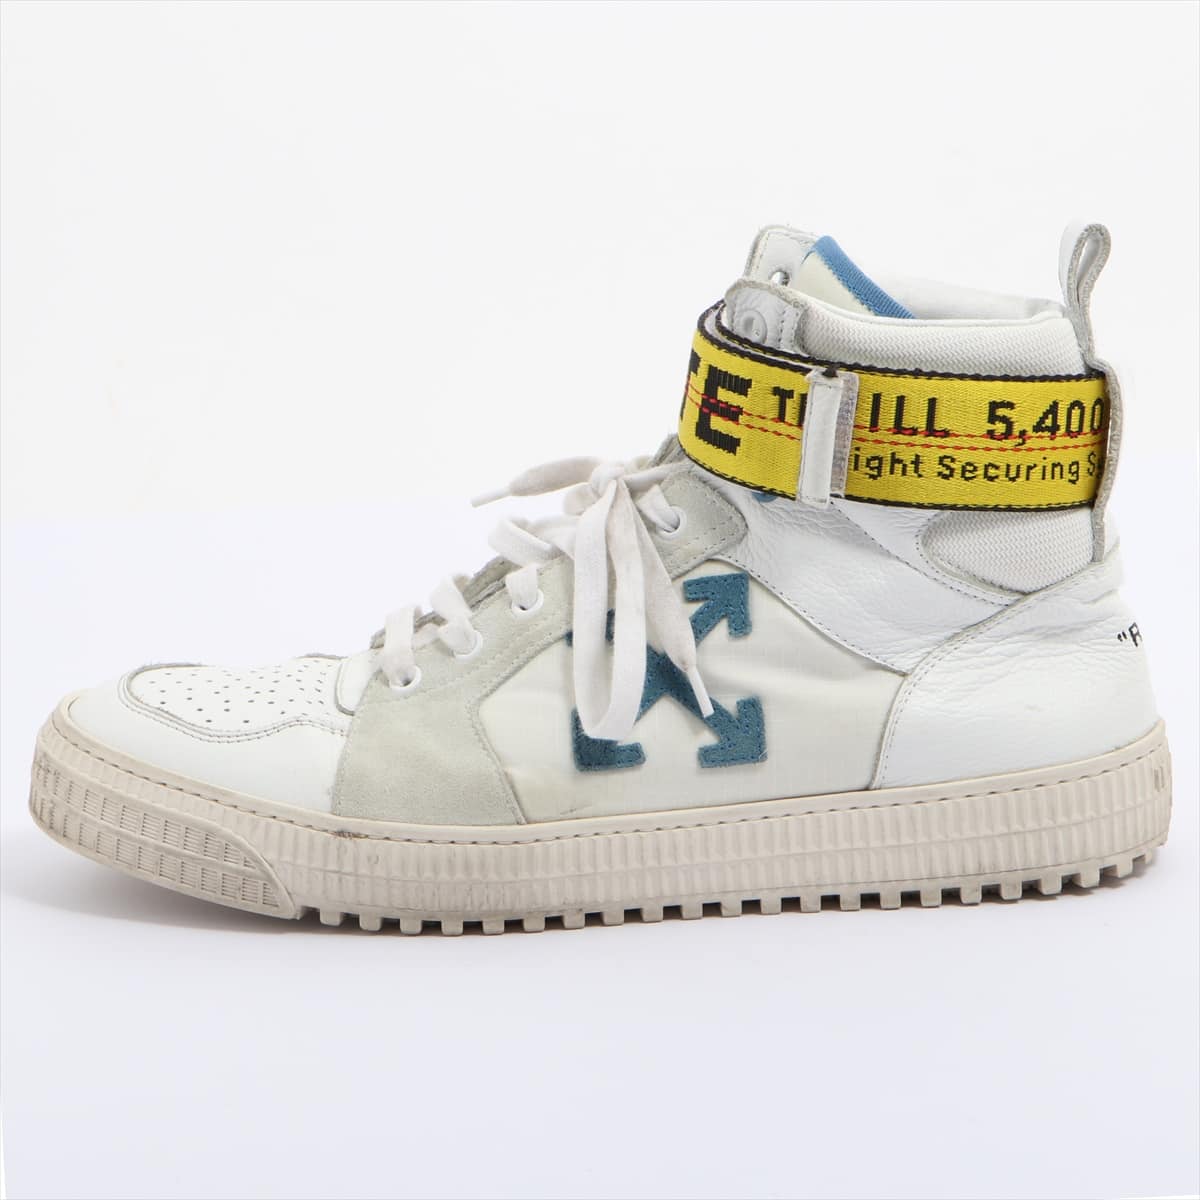 Off-White Leather High-top Sneakers 44 Men's White court classic